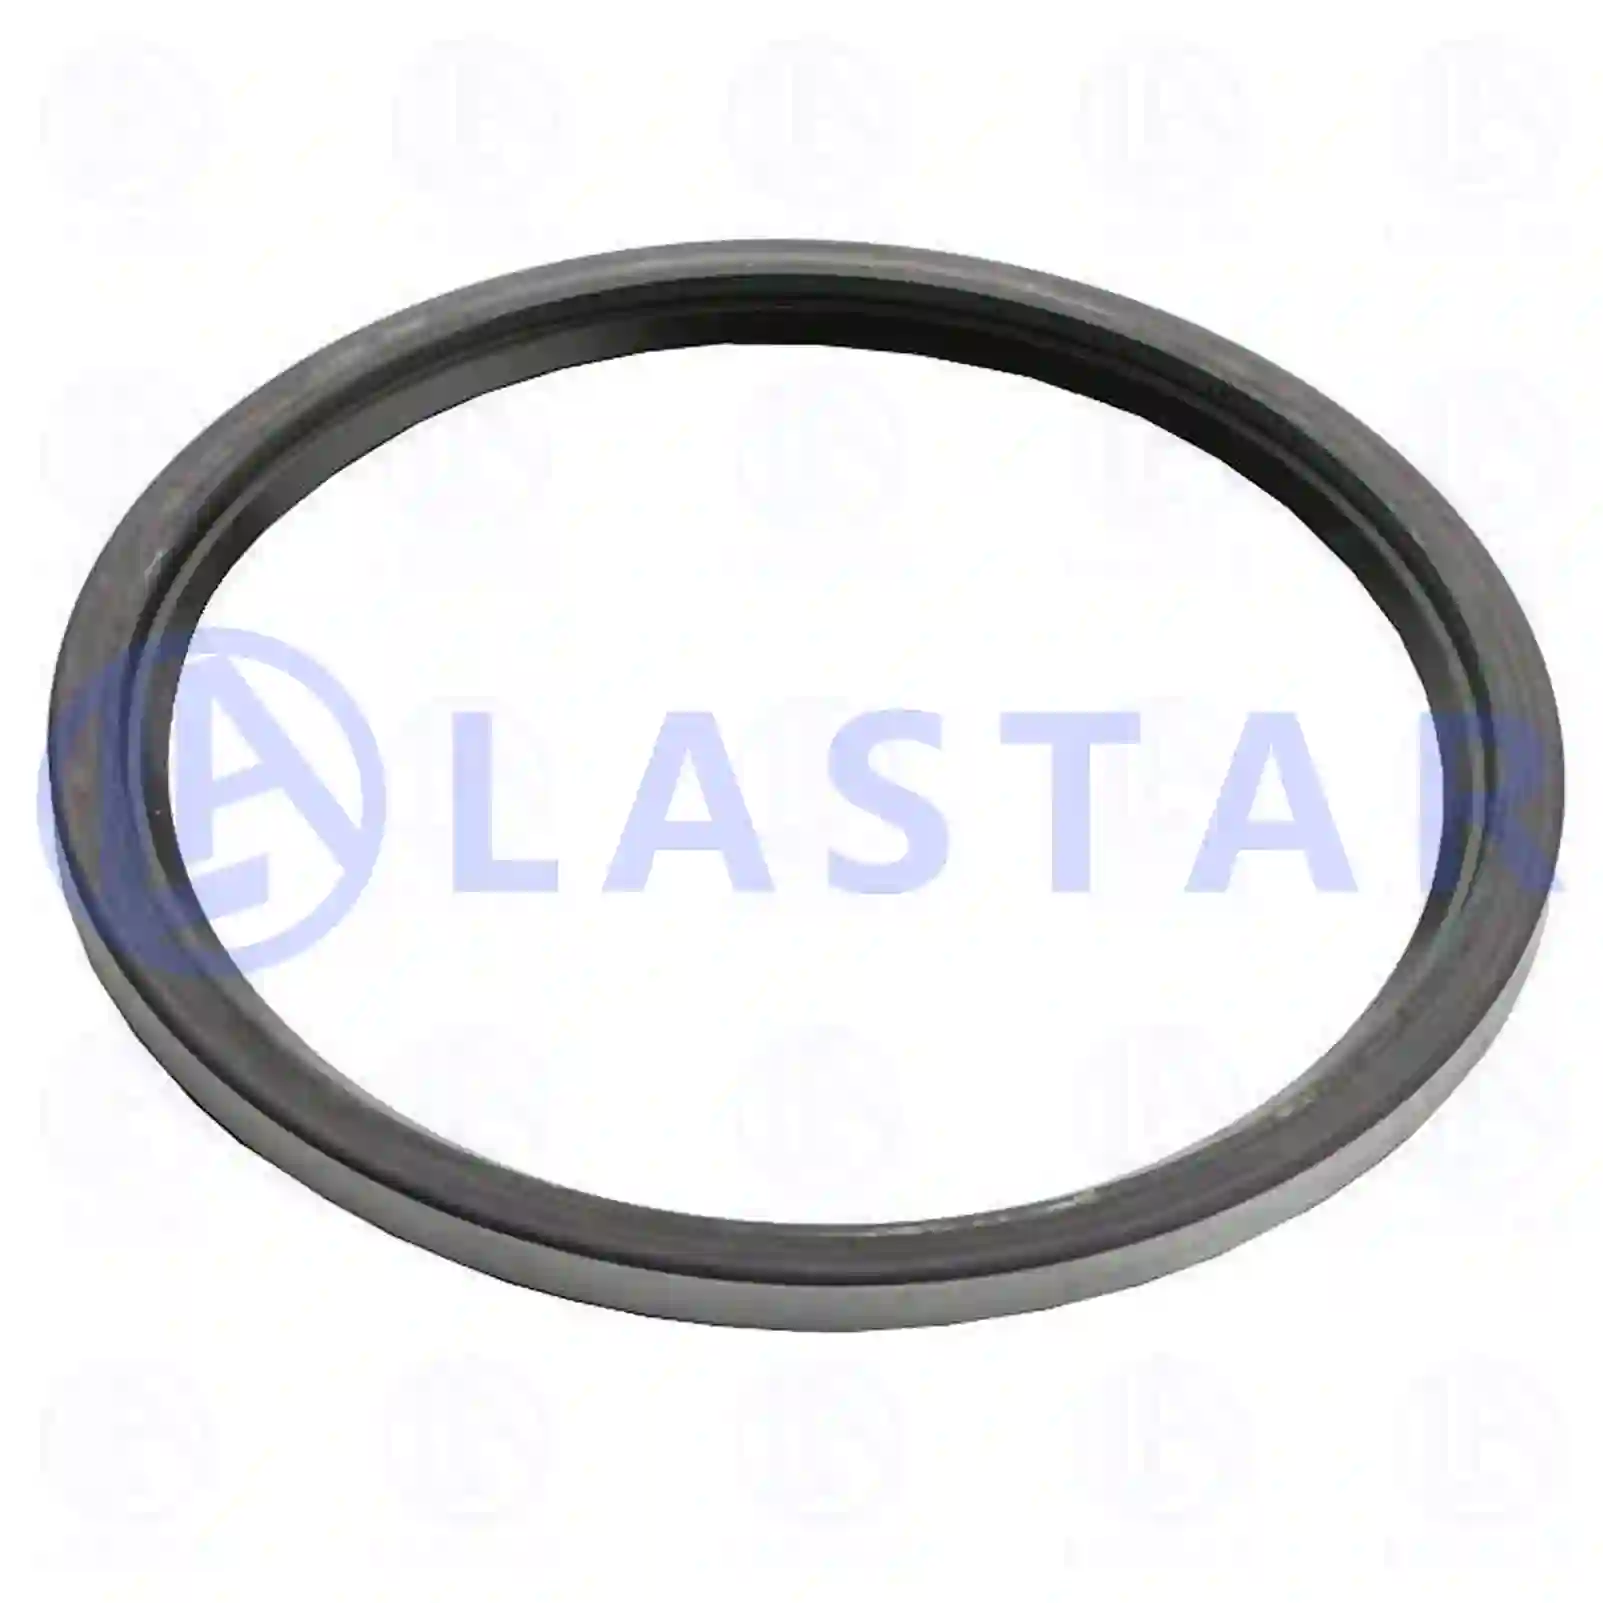 Oil seal, 77727653, 0099975346, 0119973746, , ||  77727653 Lastar Spare Part | Truck Spare Parts, Auotomotive Spare Parts Oil seal, 77727653, 0099975346, 0119973746, , ||  77727653 Lastar Spare Part | Truck Spare Parts, Auotomotive Spare Parts